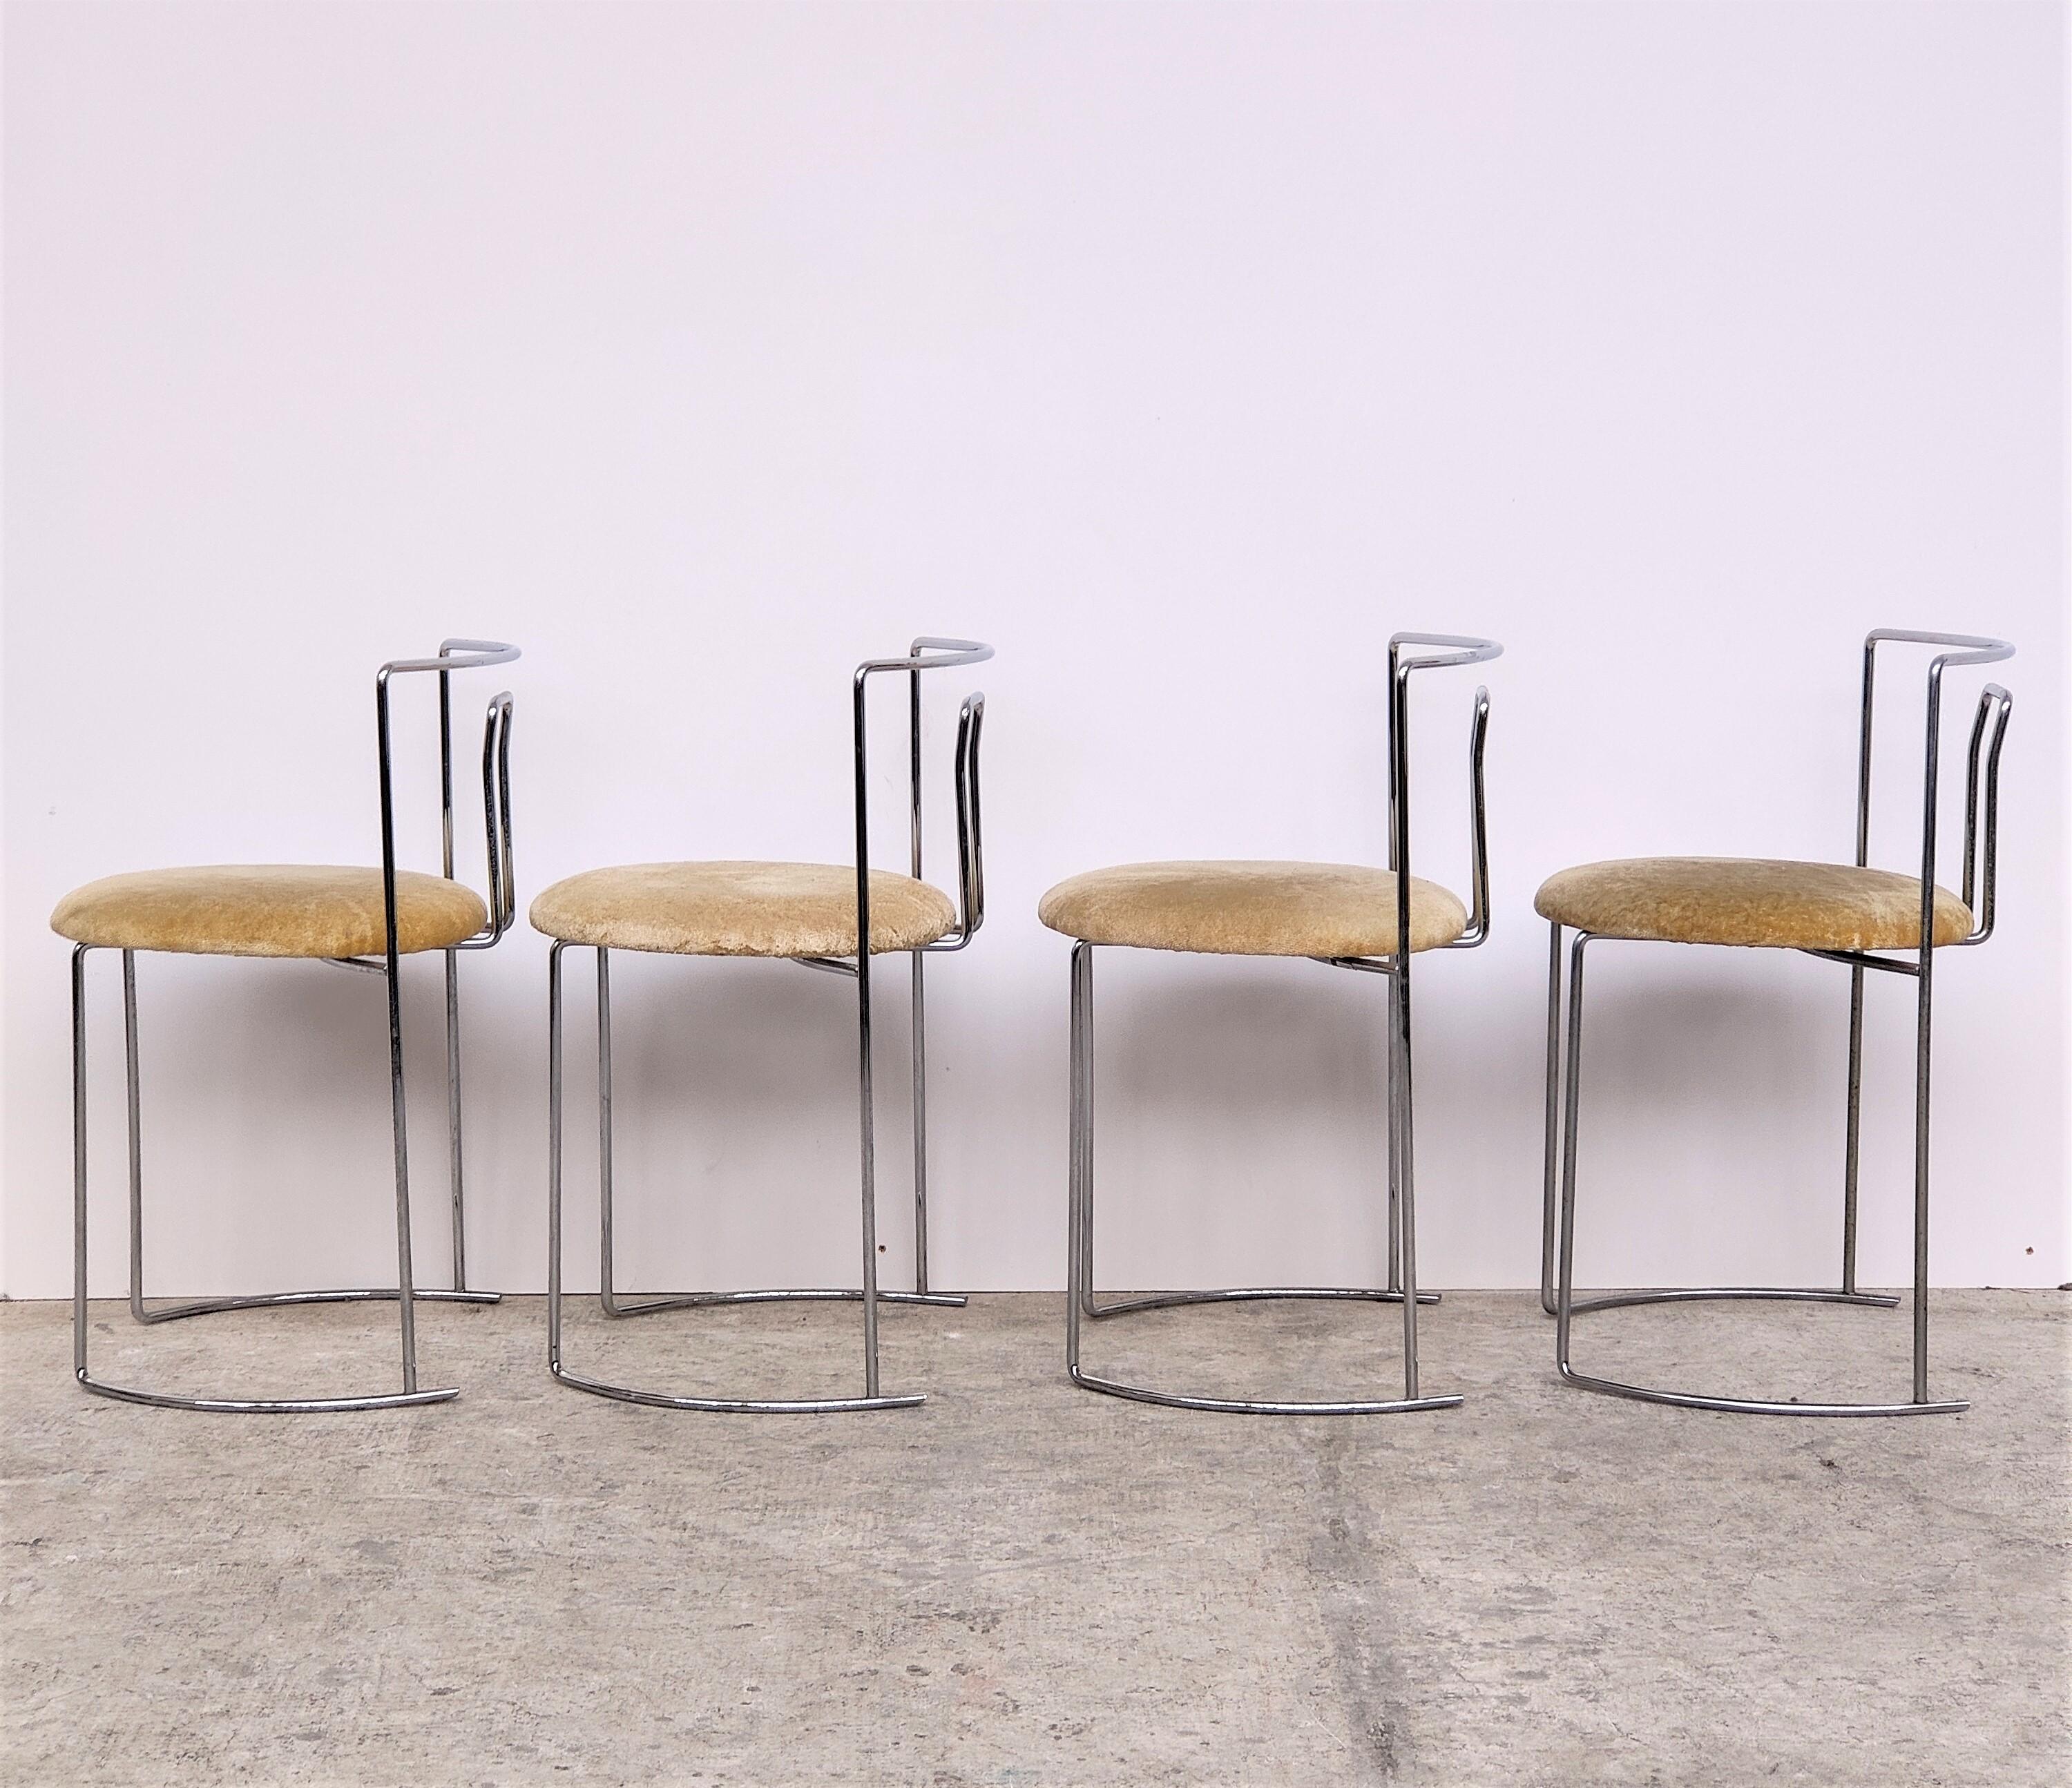 Extremely rare set of 4 dining chairs Gaja model, designed by the Japanese architect Kazuhide Takahama.
Steel chromed frame, fabric seat.
Chair with a light and sinuous shape that enhances its elegance.
In very good original